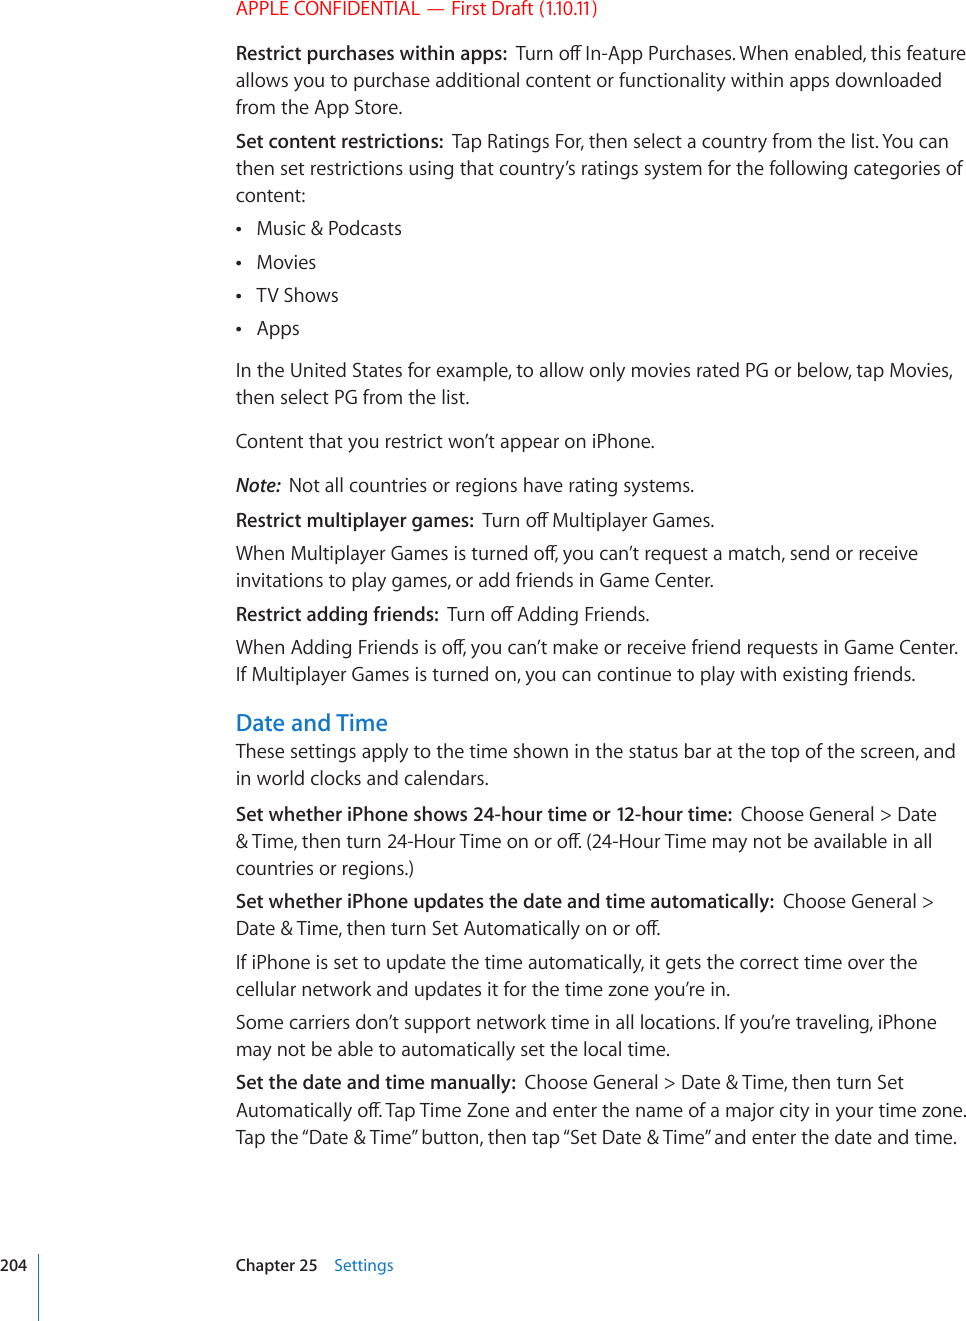 APPLE CONFIDENTIAL — First Draft (1.10.11)Restrict purchases within apps:  6WTPQÒ+P#RR2WTEJCUGU9JGPGPCDNGFVJKUHGCVWTGallows you to purchase additional content or functionality within apps downloaded from the App Store.Set content restrictions:  Tap Ratings For, then select a country from the list. You can then set restrictions using that country’s ratings system for the following categories of content:Music &amp; Podcasts Movies TV Shows Apps In the United States for example, to allow only movies rated PG or below, tap Movies, then select PG from the list. Content that you restrict won’t appear on iPhone.Note:  Not all countries or regions have rating systems.Restrict multiplayer games:  6WTPQÒ/WNVKRNC[GT)COGU9JGP/WNVKRNC[GT)COGUKUVWTPGFQÒ[QWECP¨VTGSWGUVCOCVEJUGPFQTTGEGKXGinvitations to play games, or add friends in Game Center.Restrict adding friends:  6WTPQÒ#FFKPI(TKGPFU9JGP#FFKPI(TKGPFUKUQÒ[QWECP¨VOCMGQTTGEGKXGHTKGPFTGSWGUVUKP)COG%GPVGTIf Multiplayer Games is turned on, you can continue to play with existing friends.Date and TimeThese settings apply to the time shown in the status bar at the top of the screen, and in world clocks and calendars.Set whether iPhone shows 24-hour time or 12-hour time:  Choose General &gt; Date 6KOGVJGPVWTP*QWT6KOGQPQTQÒ*QWT6KOGOC[PQVDGCXCKNCDNGKPCNNcountries or regions.)Set whether iPhone updates the date and time automatically:  Choose General &gt; &amp;CVG6KOGVJGPVWTP5GV#WVQOCVKECNN[QPQTQÒIf iPhone is set to update the time automatically, it gets the correct time over the cellular network and updates it for the time zone you’re in.Some carriers don’t support network time in all locations. If you’re traveling, iPhone may not be able to automatically set the local time.Set the date and time manually:  Choose General &gt; Date &amp; Time, then turn Set #WVQOCVKECNN[QÒ6CR6KOG&lt;QPGCPFGPVGTVJGPCOGQHCOCLQTEKV[KP[QWTVKOG\QPGTap the “Date &amp; Time” button, then tap “Set Date &amp; Time” and enter the date and time.204 Chapter 25    Settings